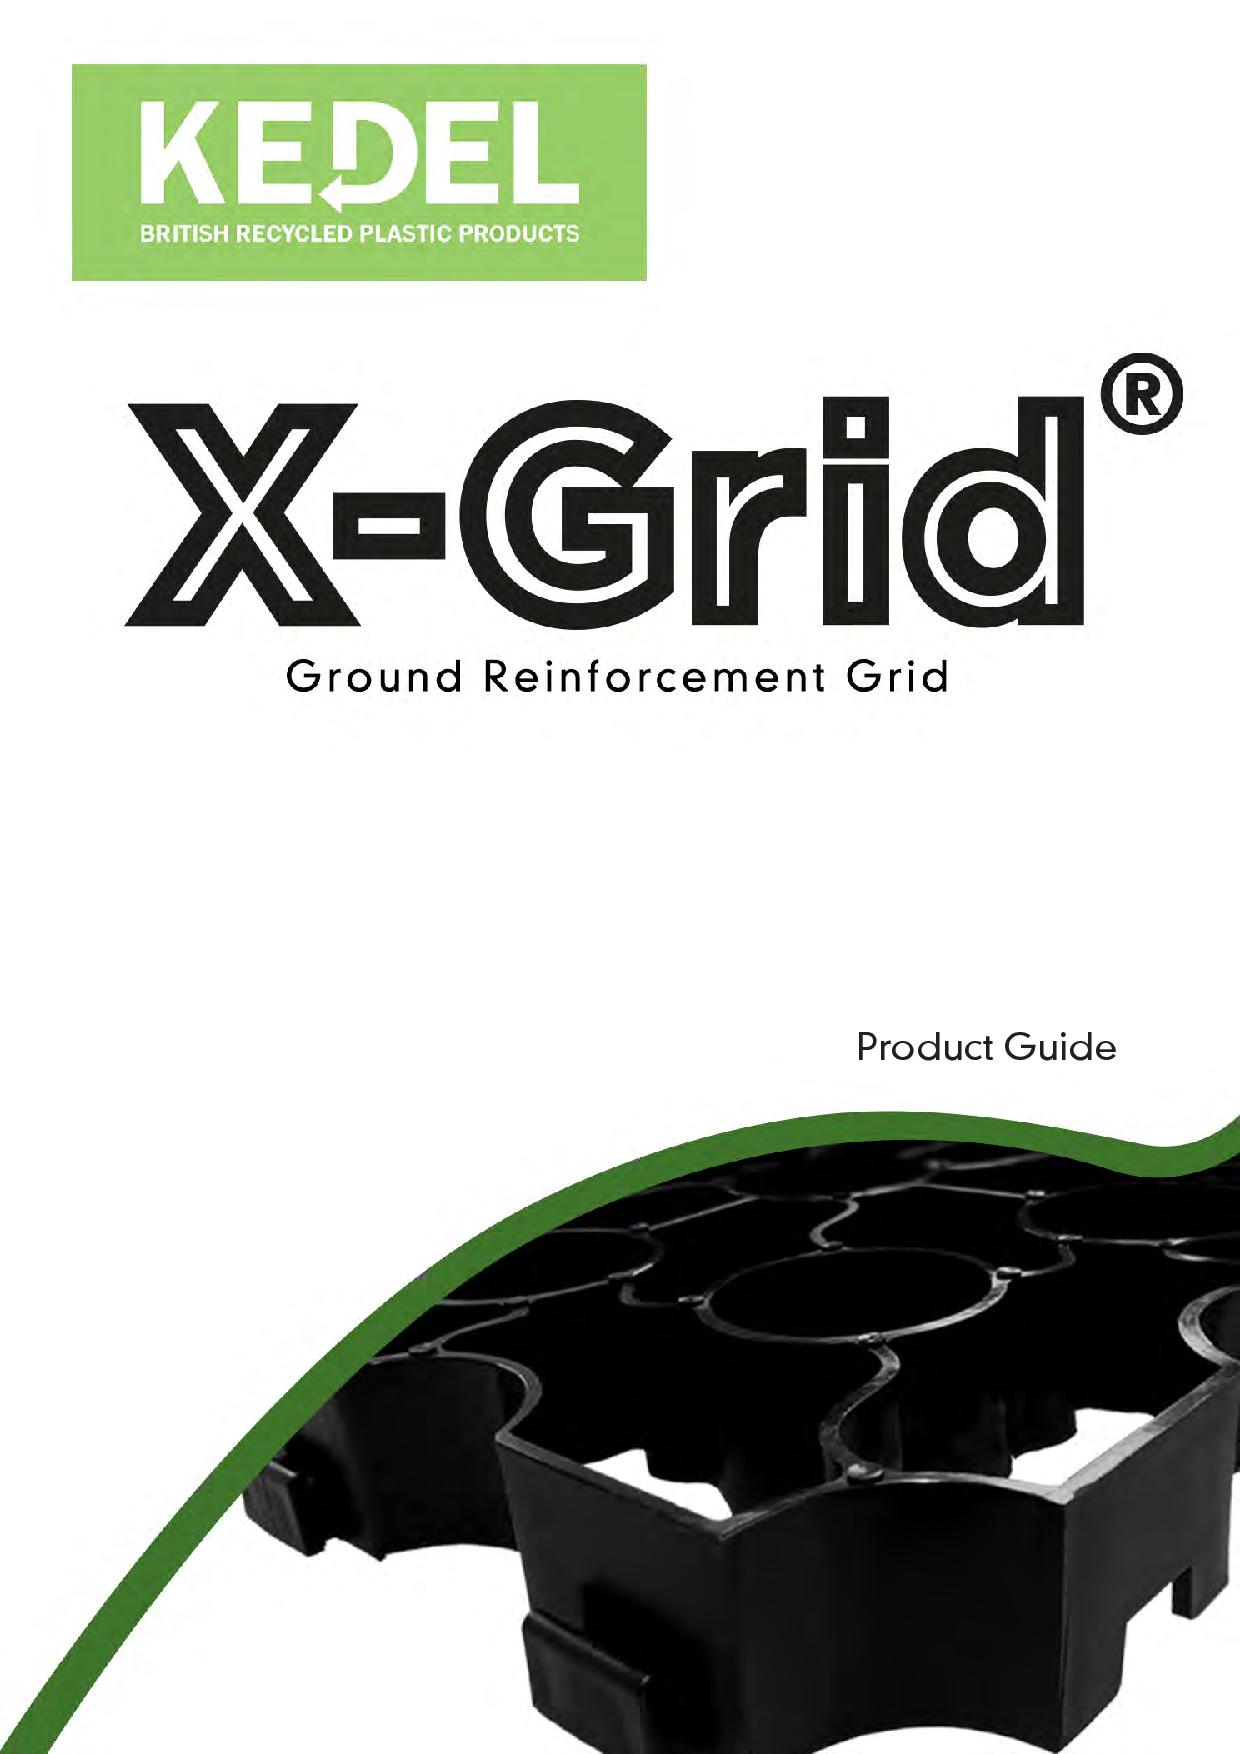 Kedel X Grid - Product Guide